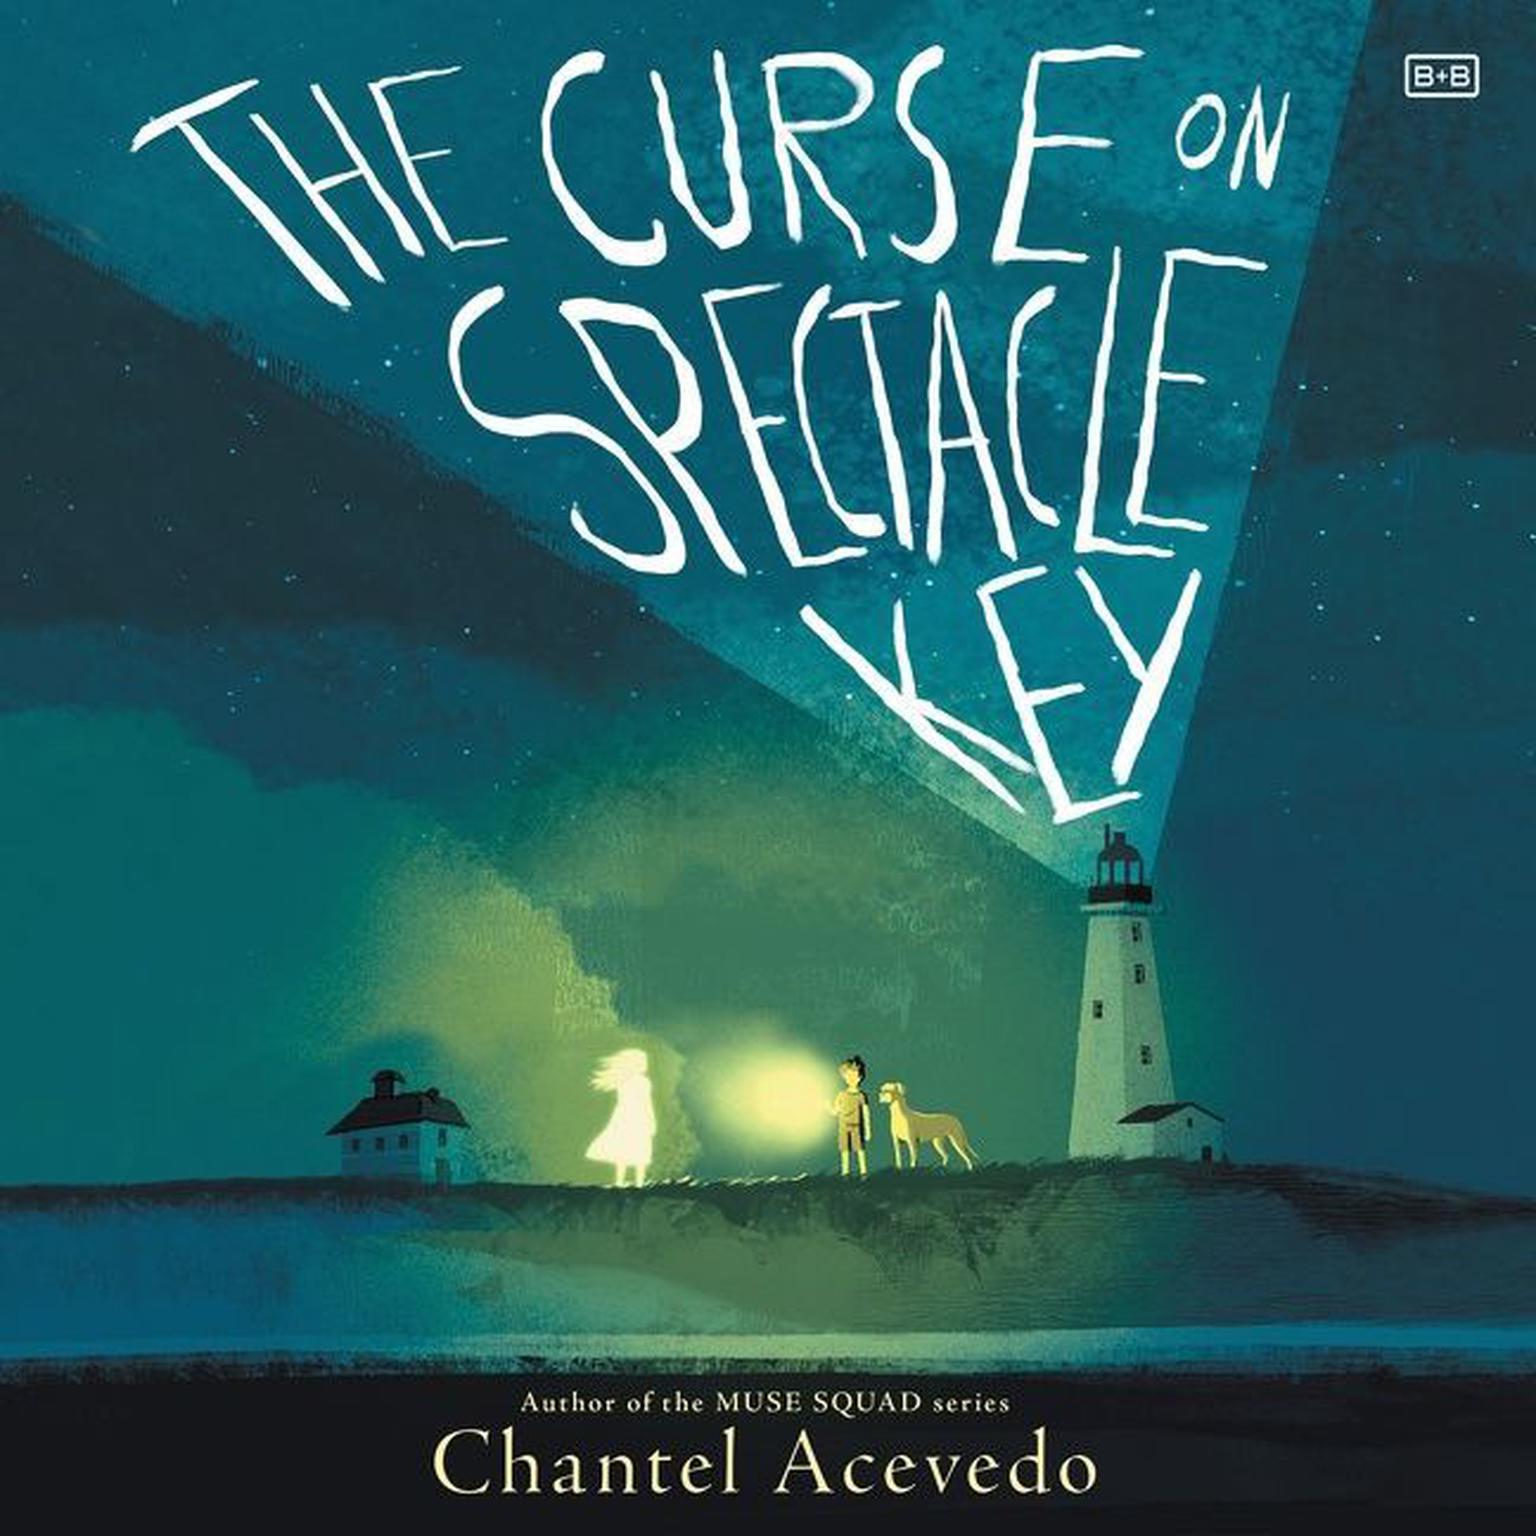 The Curse on Spectacle Key Audiobook, by Chantel Acevedo